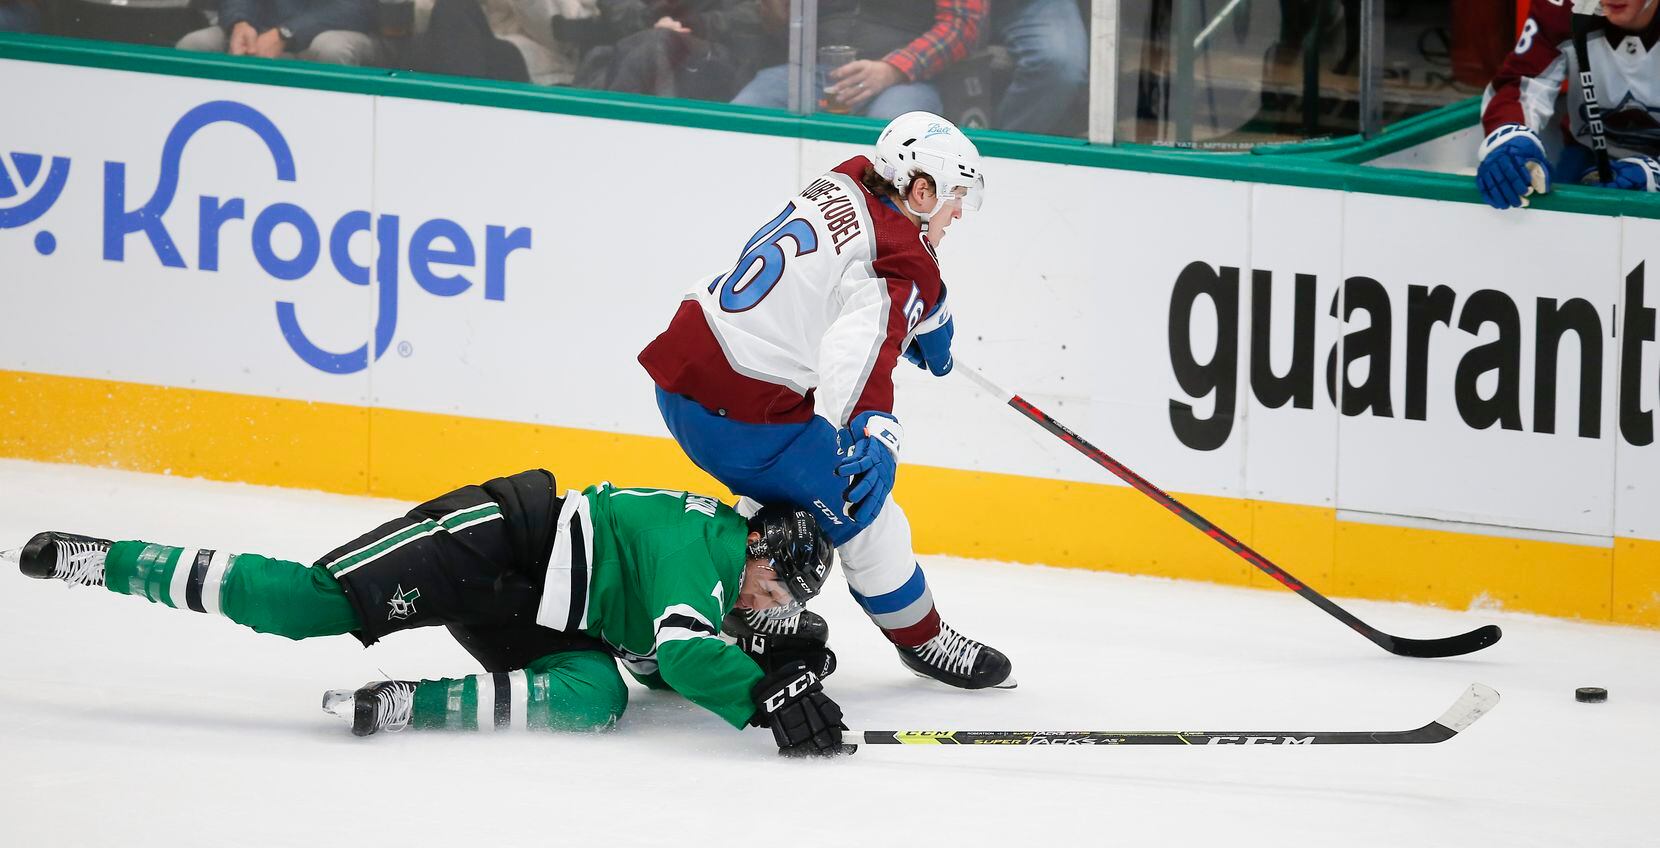 Dallas Stars forward Jason Robertson (21) battles Colorado Avalanche forward Nicolas Aube-Kubel (16) for the puck during the first period of an NHL hockey game in Dallas, Friday, November 26, 2021. (Brandon Wade/Special Contributor)